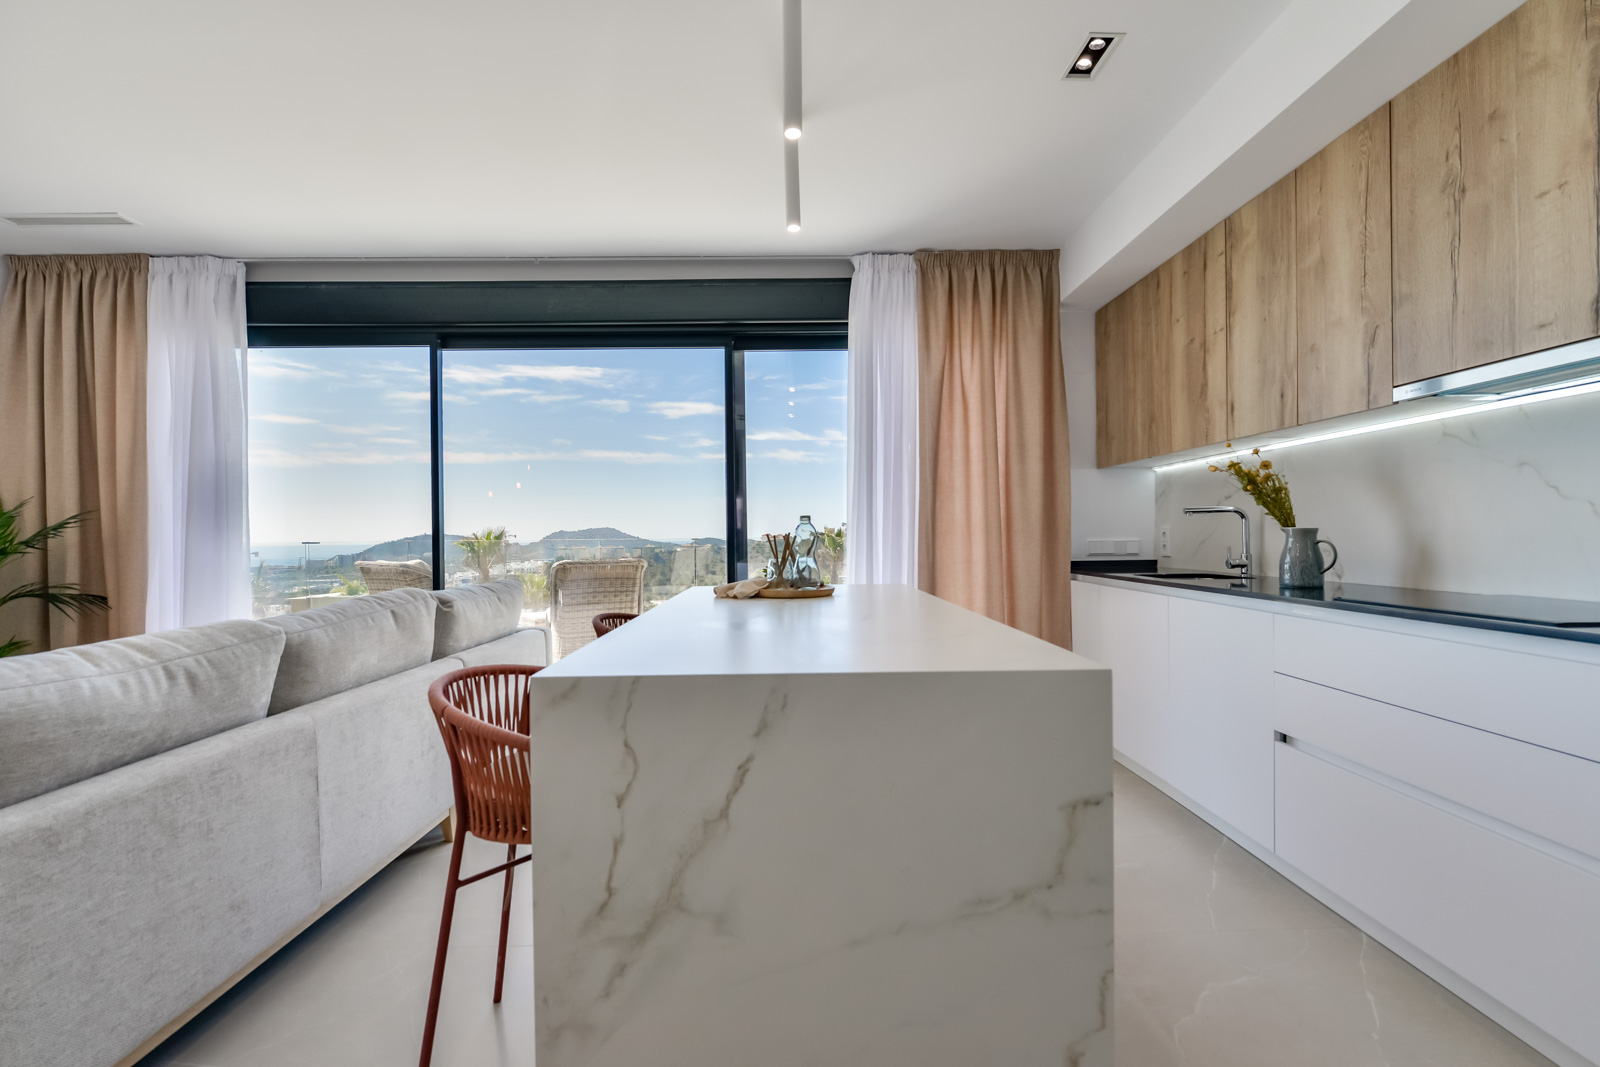 New construction apartment in Finestrat